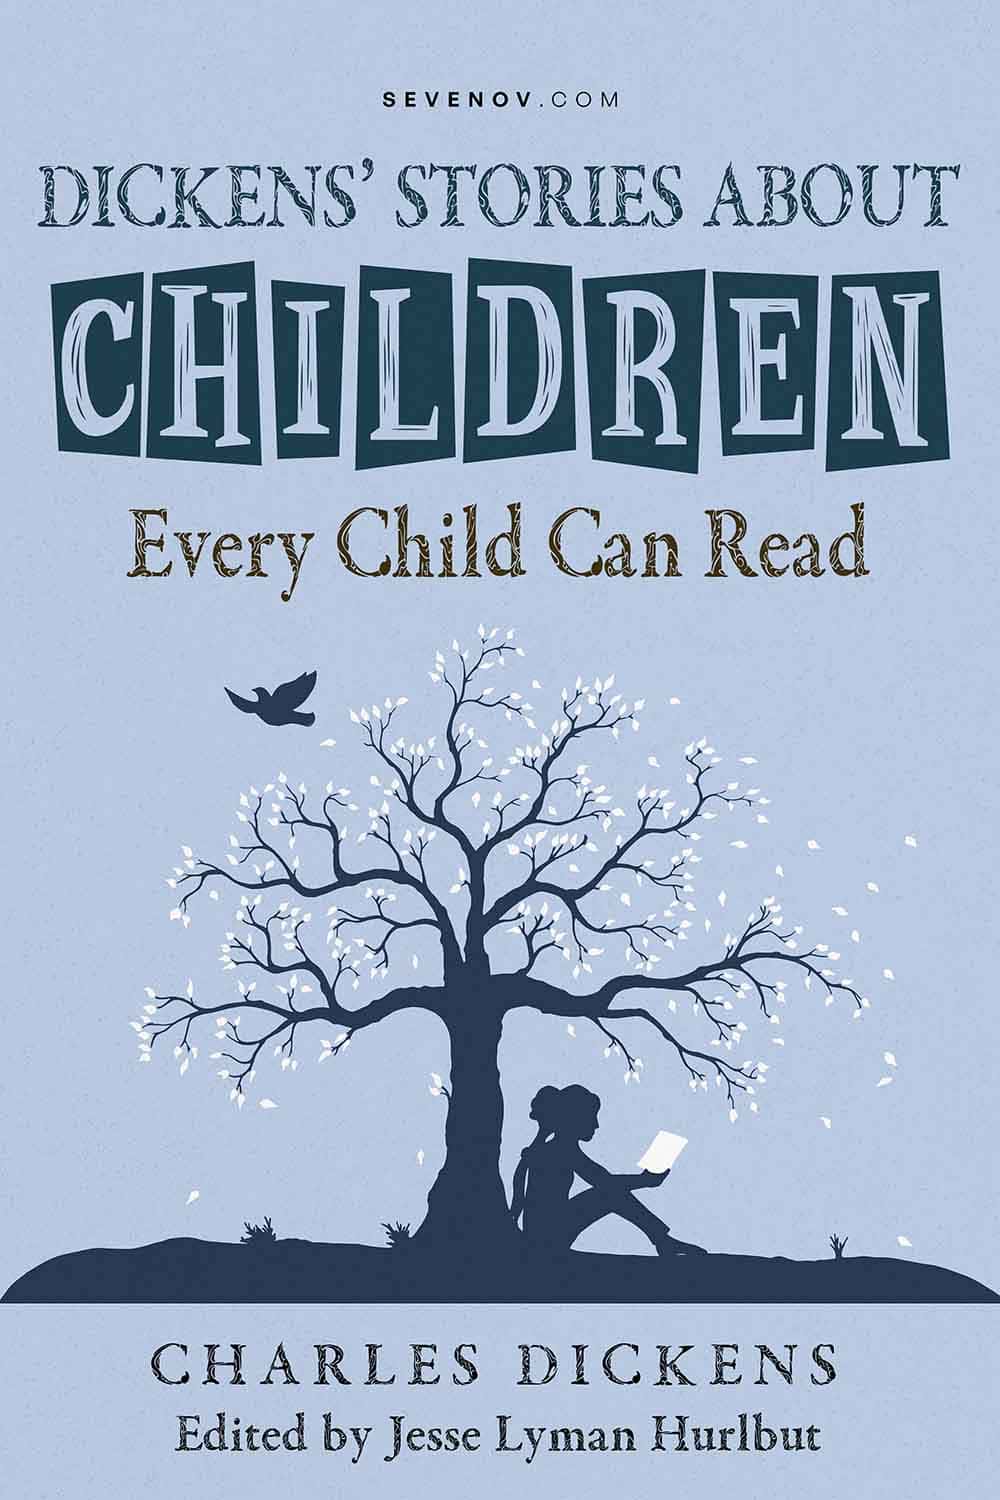 https://pagevio.com/wp-content/uploads/2023/01/dickens-stories-about-children-every-child-can-read-20220902.jpg